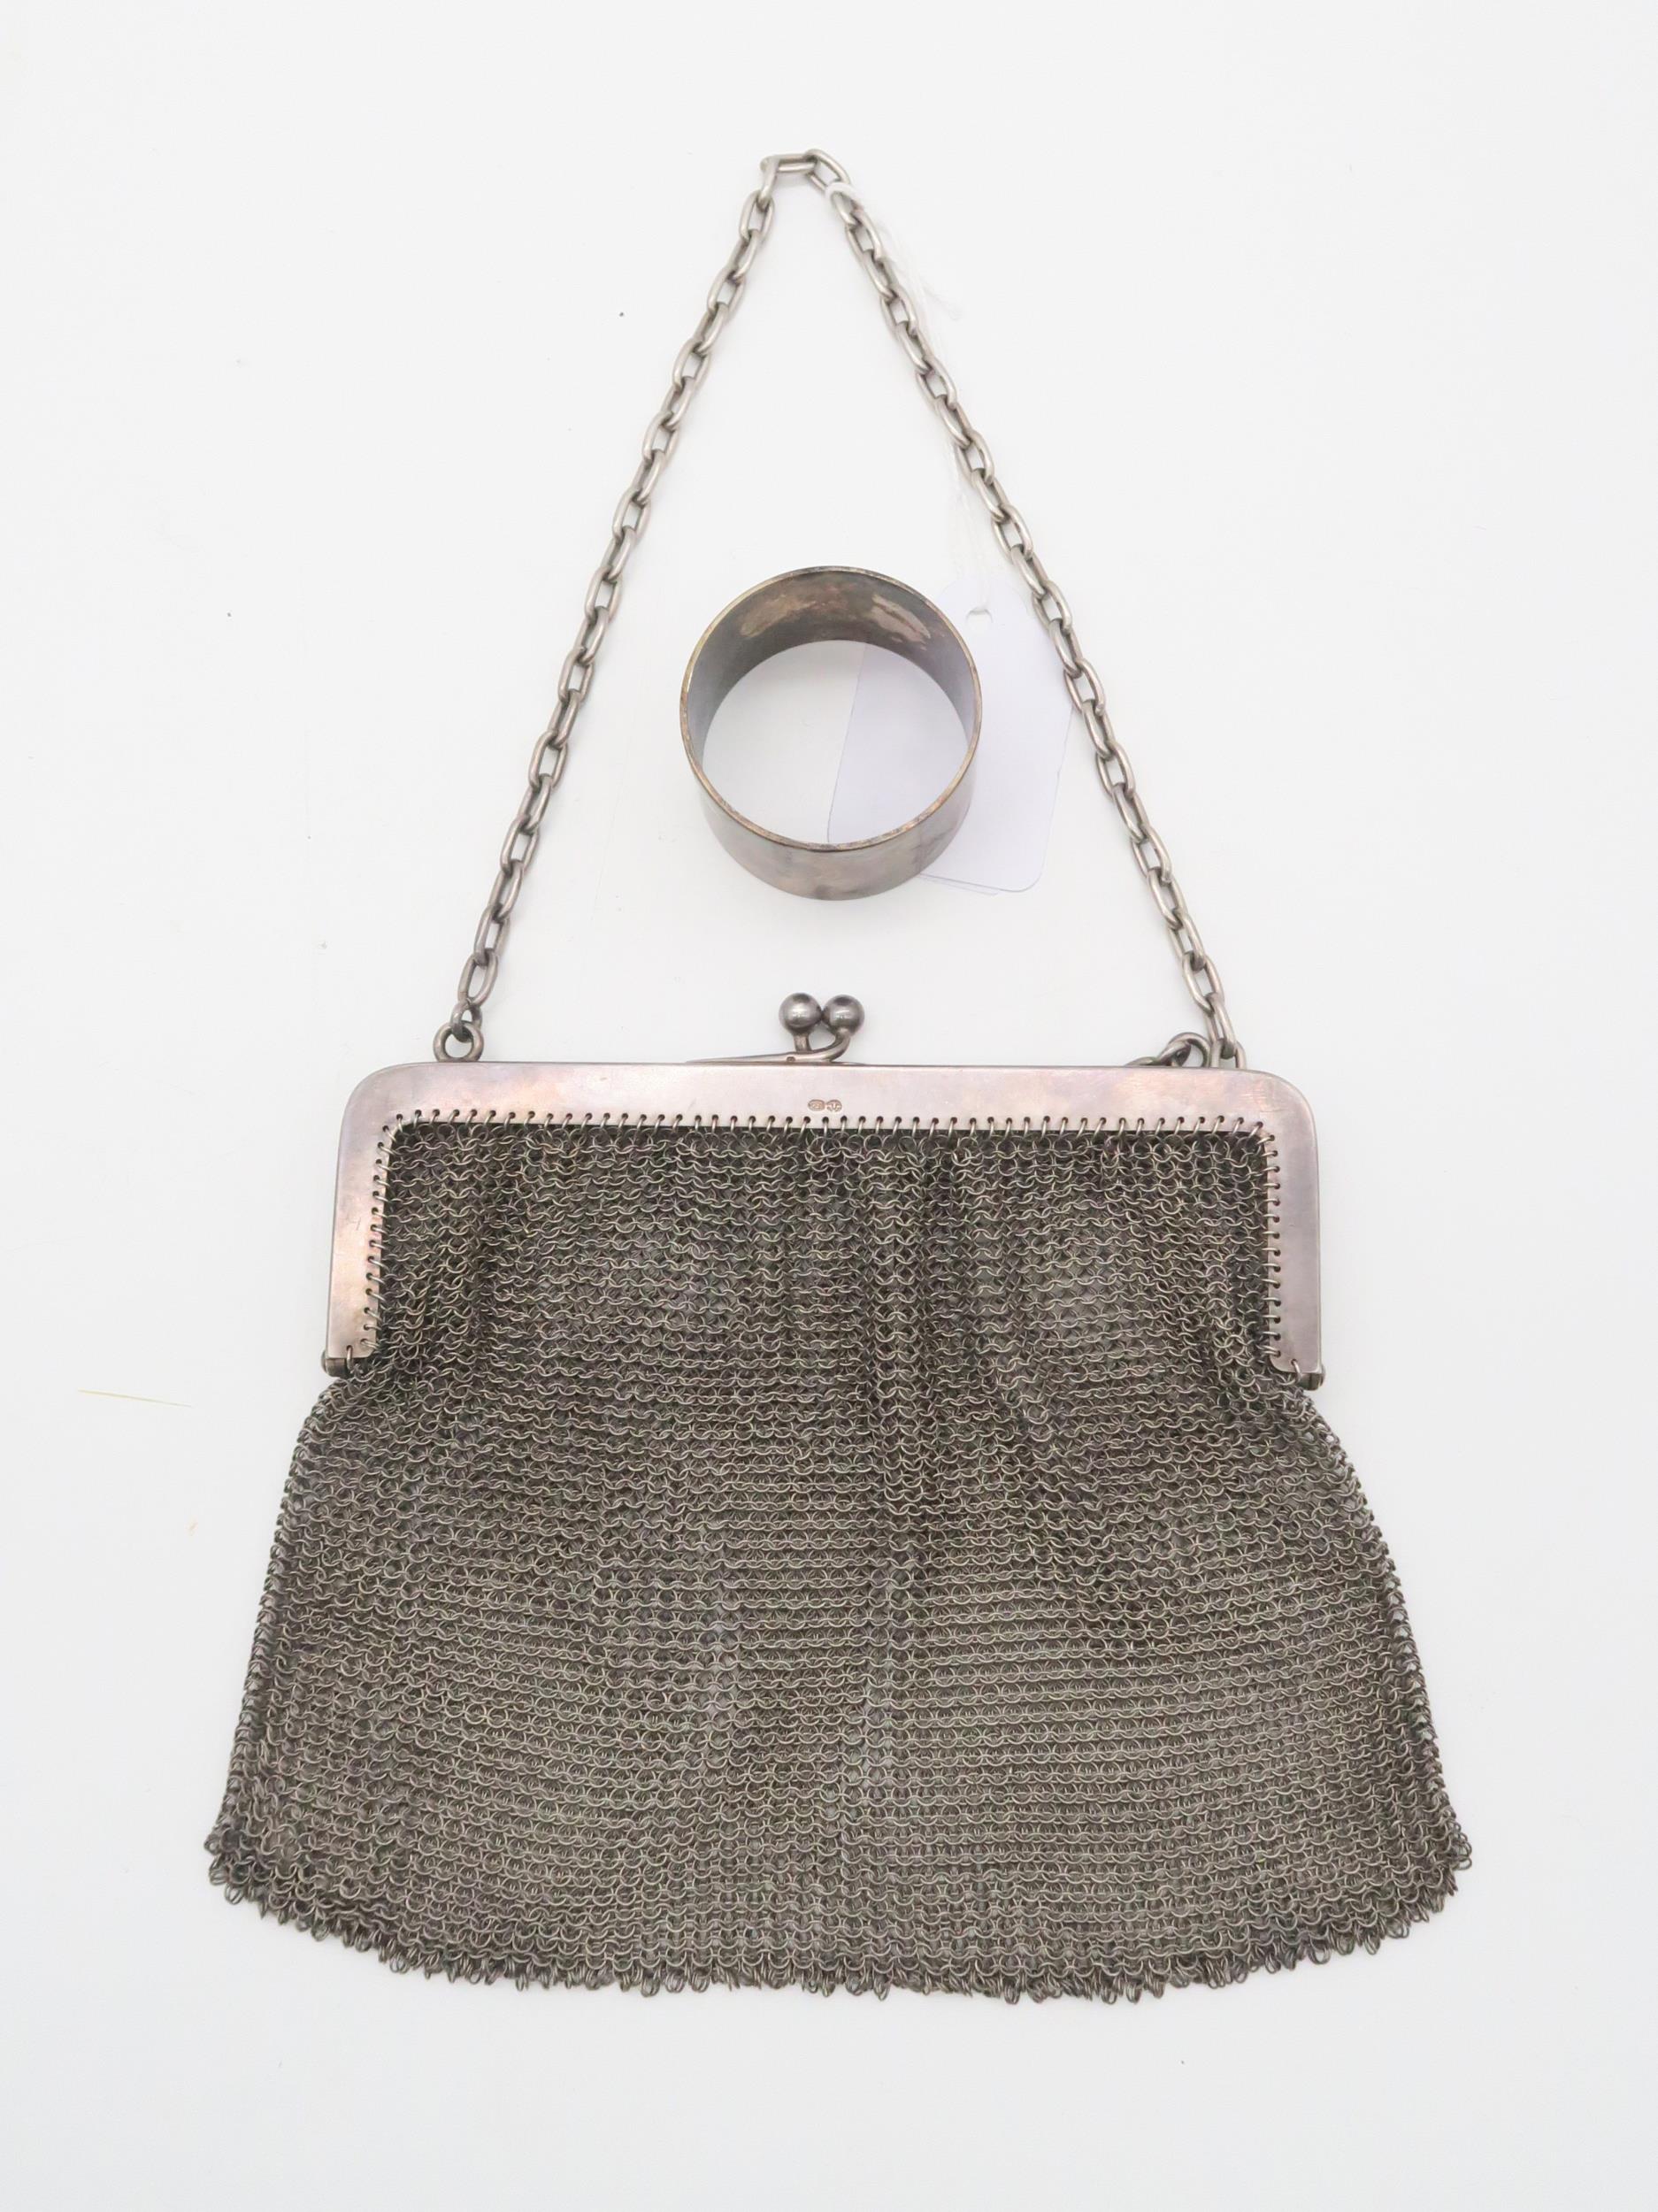 A silver chain mesh purse, with import marks for Paul Ettinger, London, and an EPNS napkin ring (